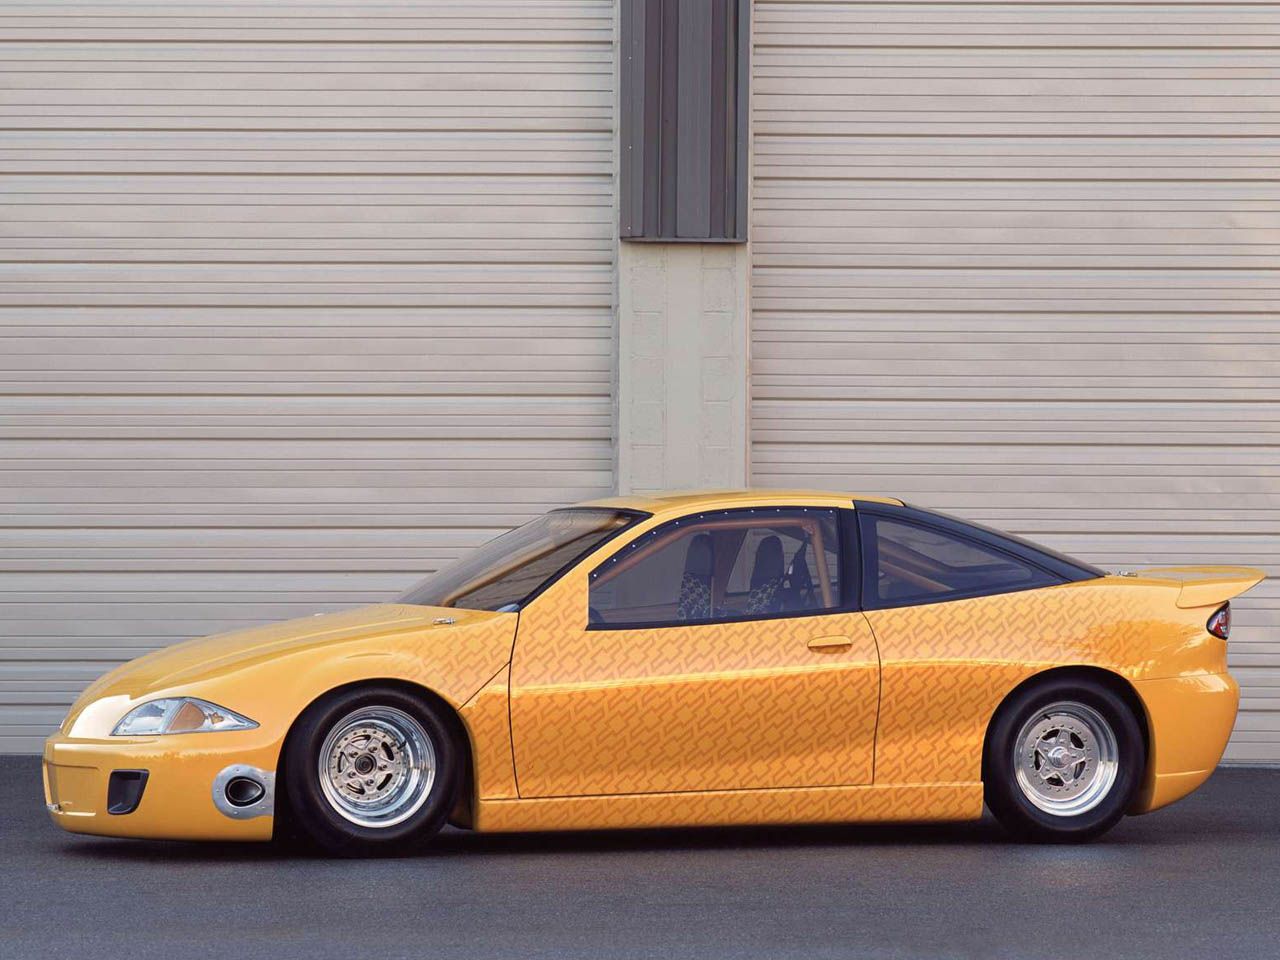 Chevrolet Cavalier Yellow Modified Side View Wallpaper 1280x960